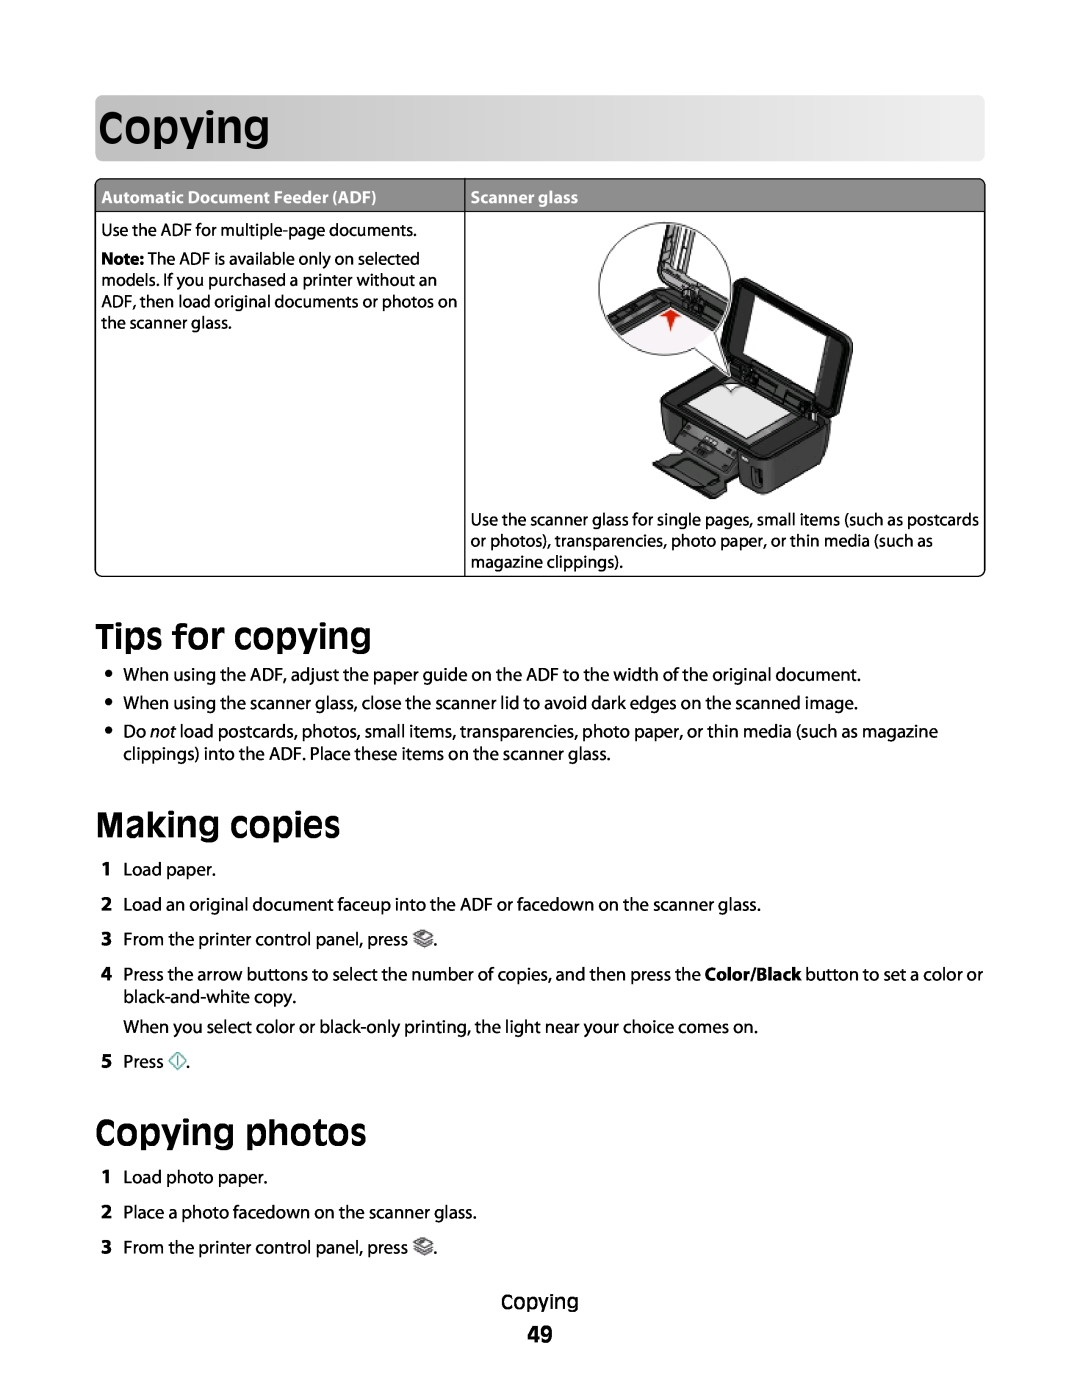 Lexmark 10E, 101 manual Tips for copying, Making copies, Copying photos 